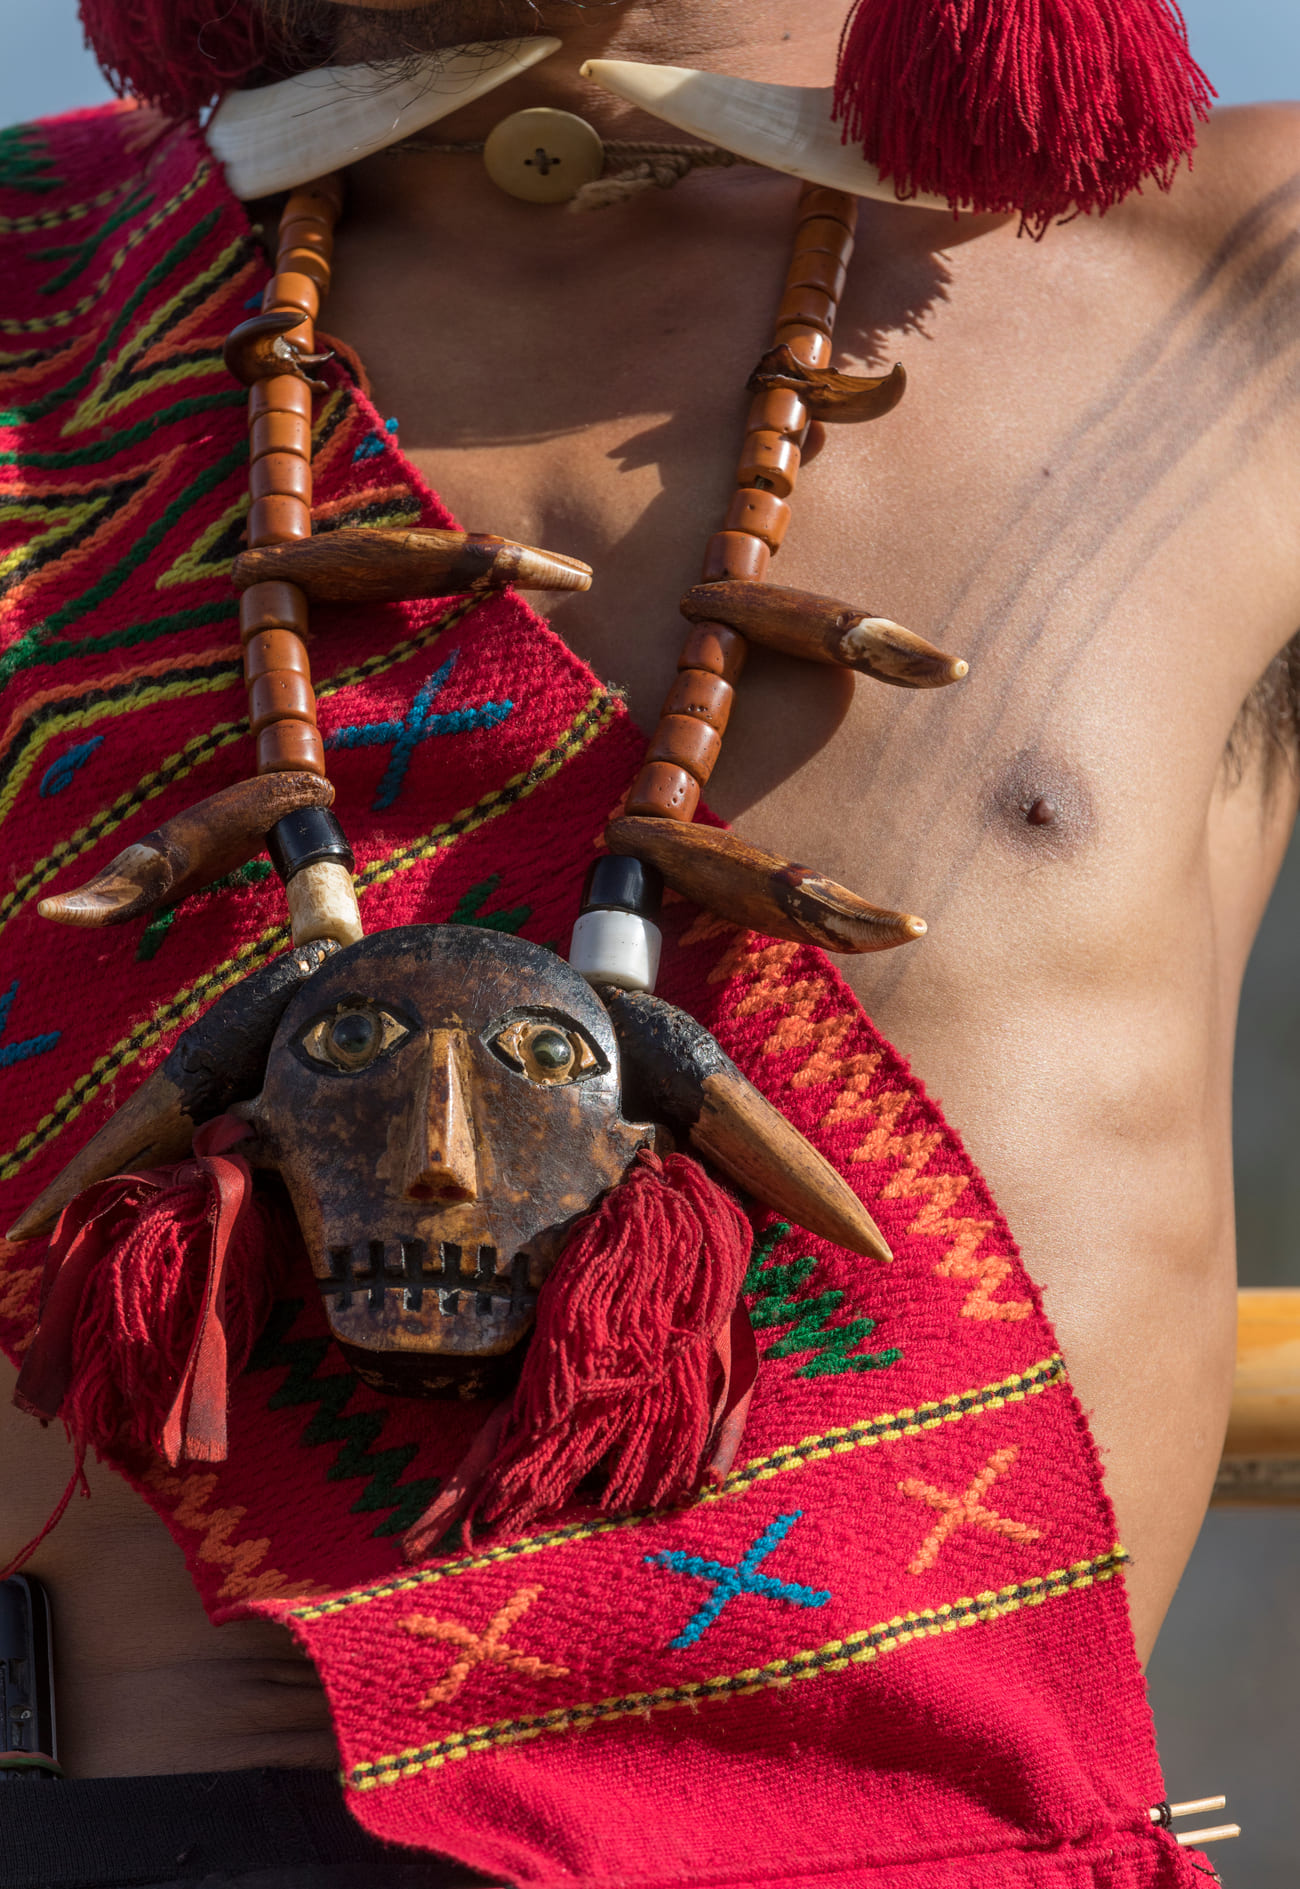 5.Traditional wood-carved Naga necklace worn during the Hornbill Festival Different materials are used to fashion the jewelry and headgear, like beads, wood, feathers etc